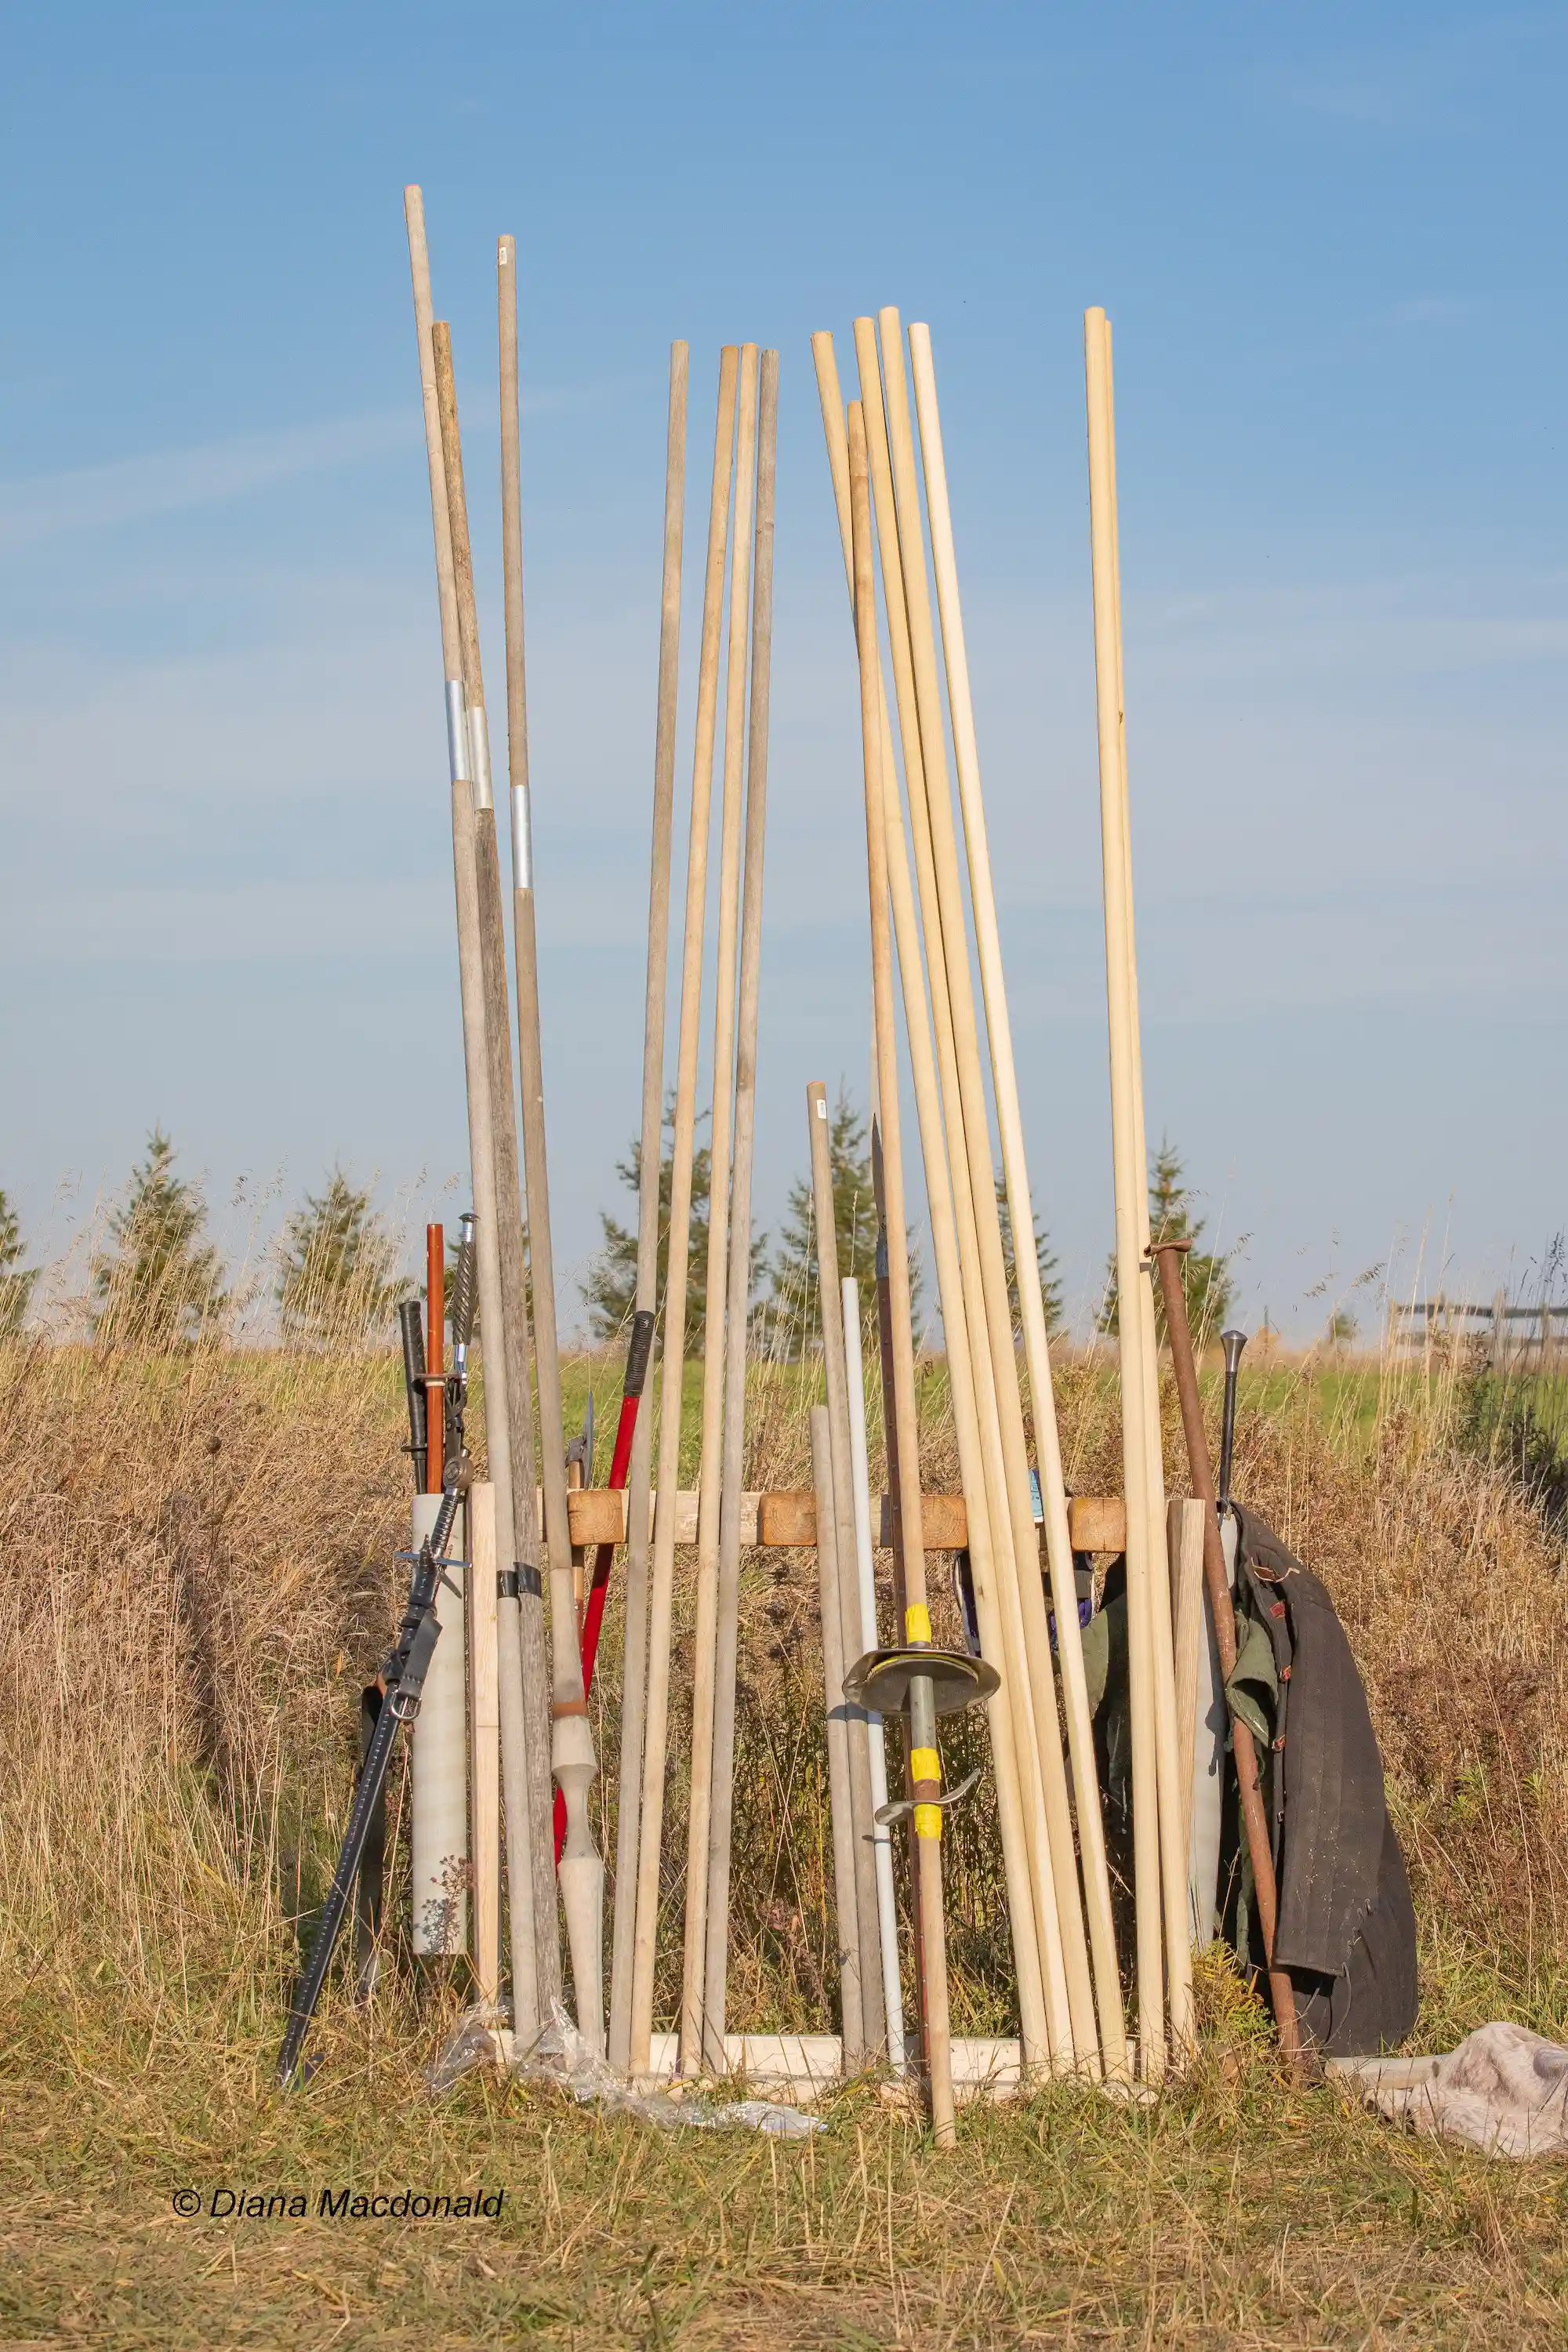 Wooden lances sitting upright in a rack